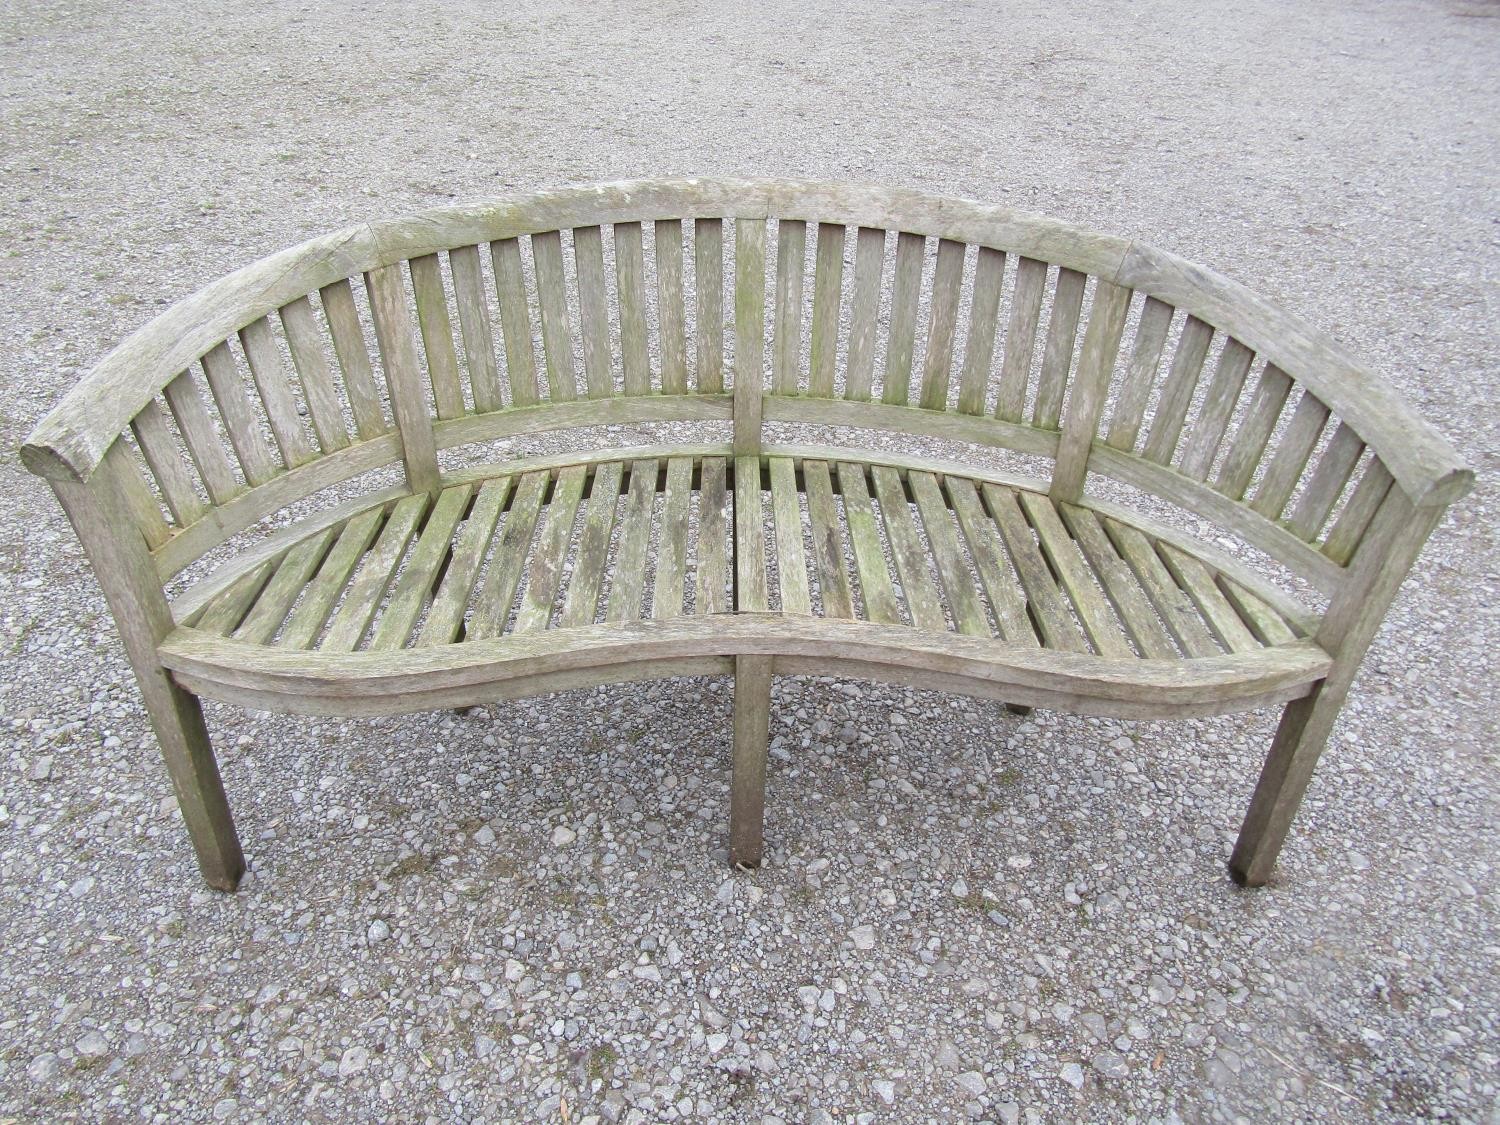 A pair of weathered teak banana shaped garden benches with loose seat cushions, 160 cm wide - Image 2 of 5